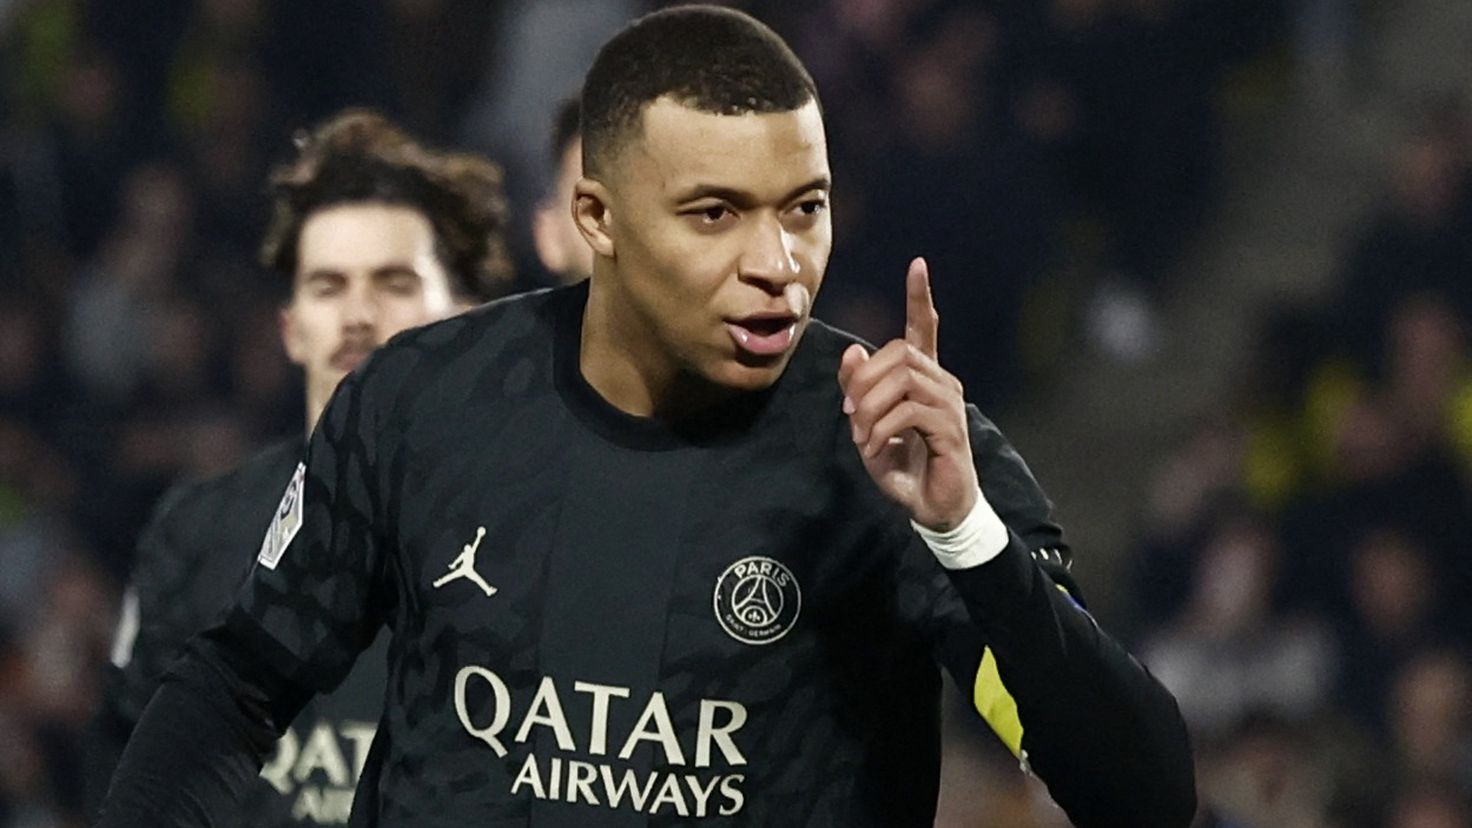 Paris Saint-Germain privately admitted that Mbappe will go to Madrid